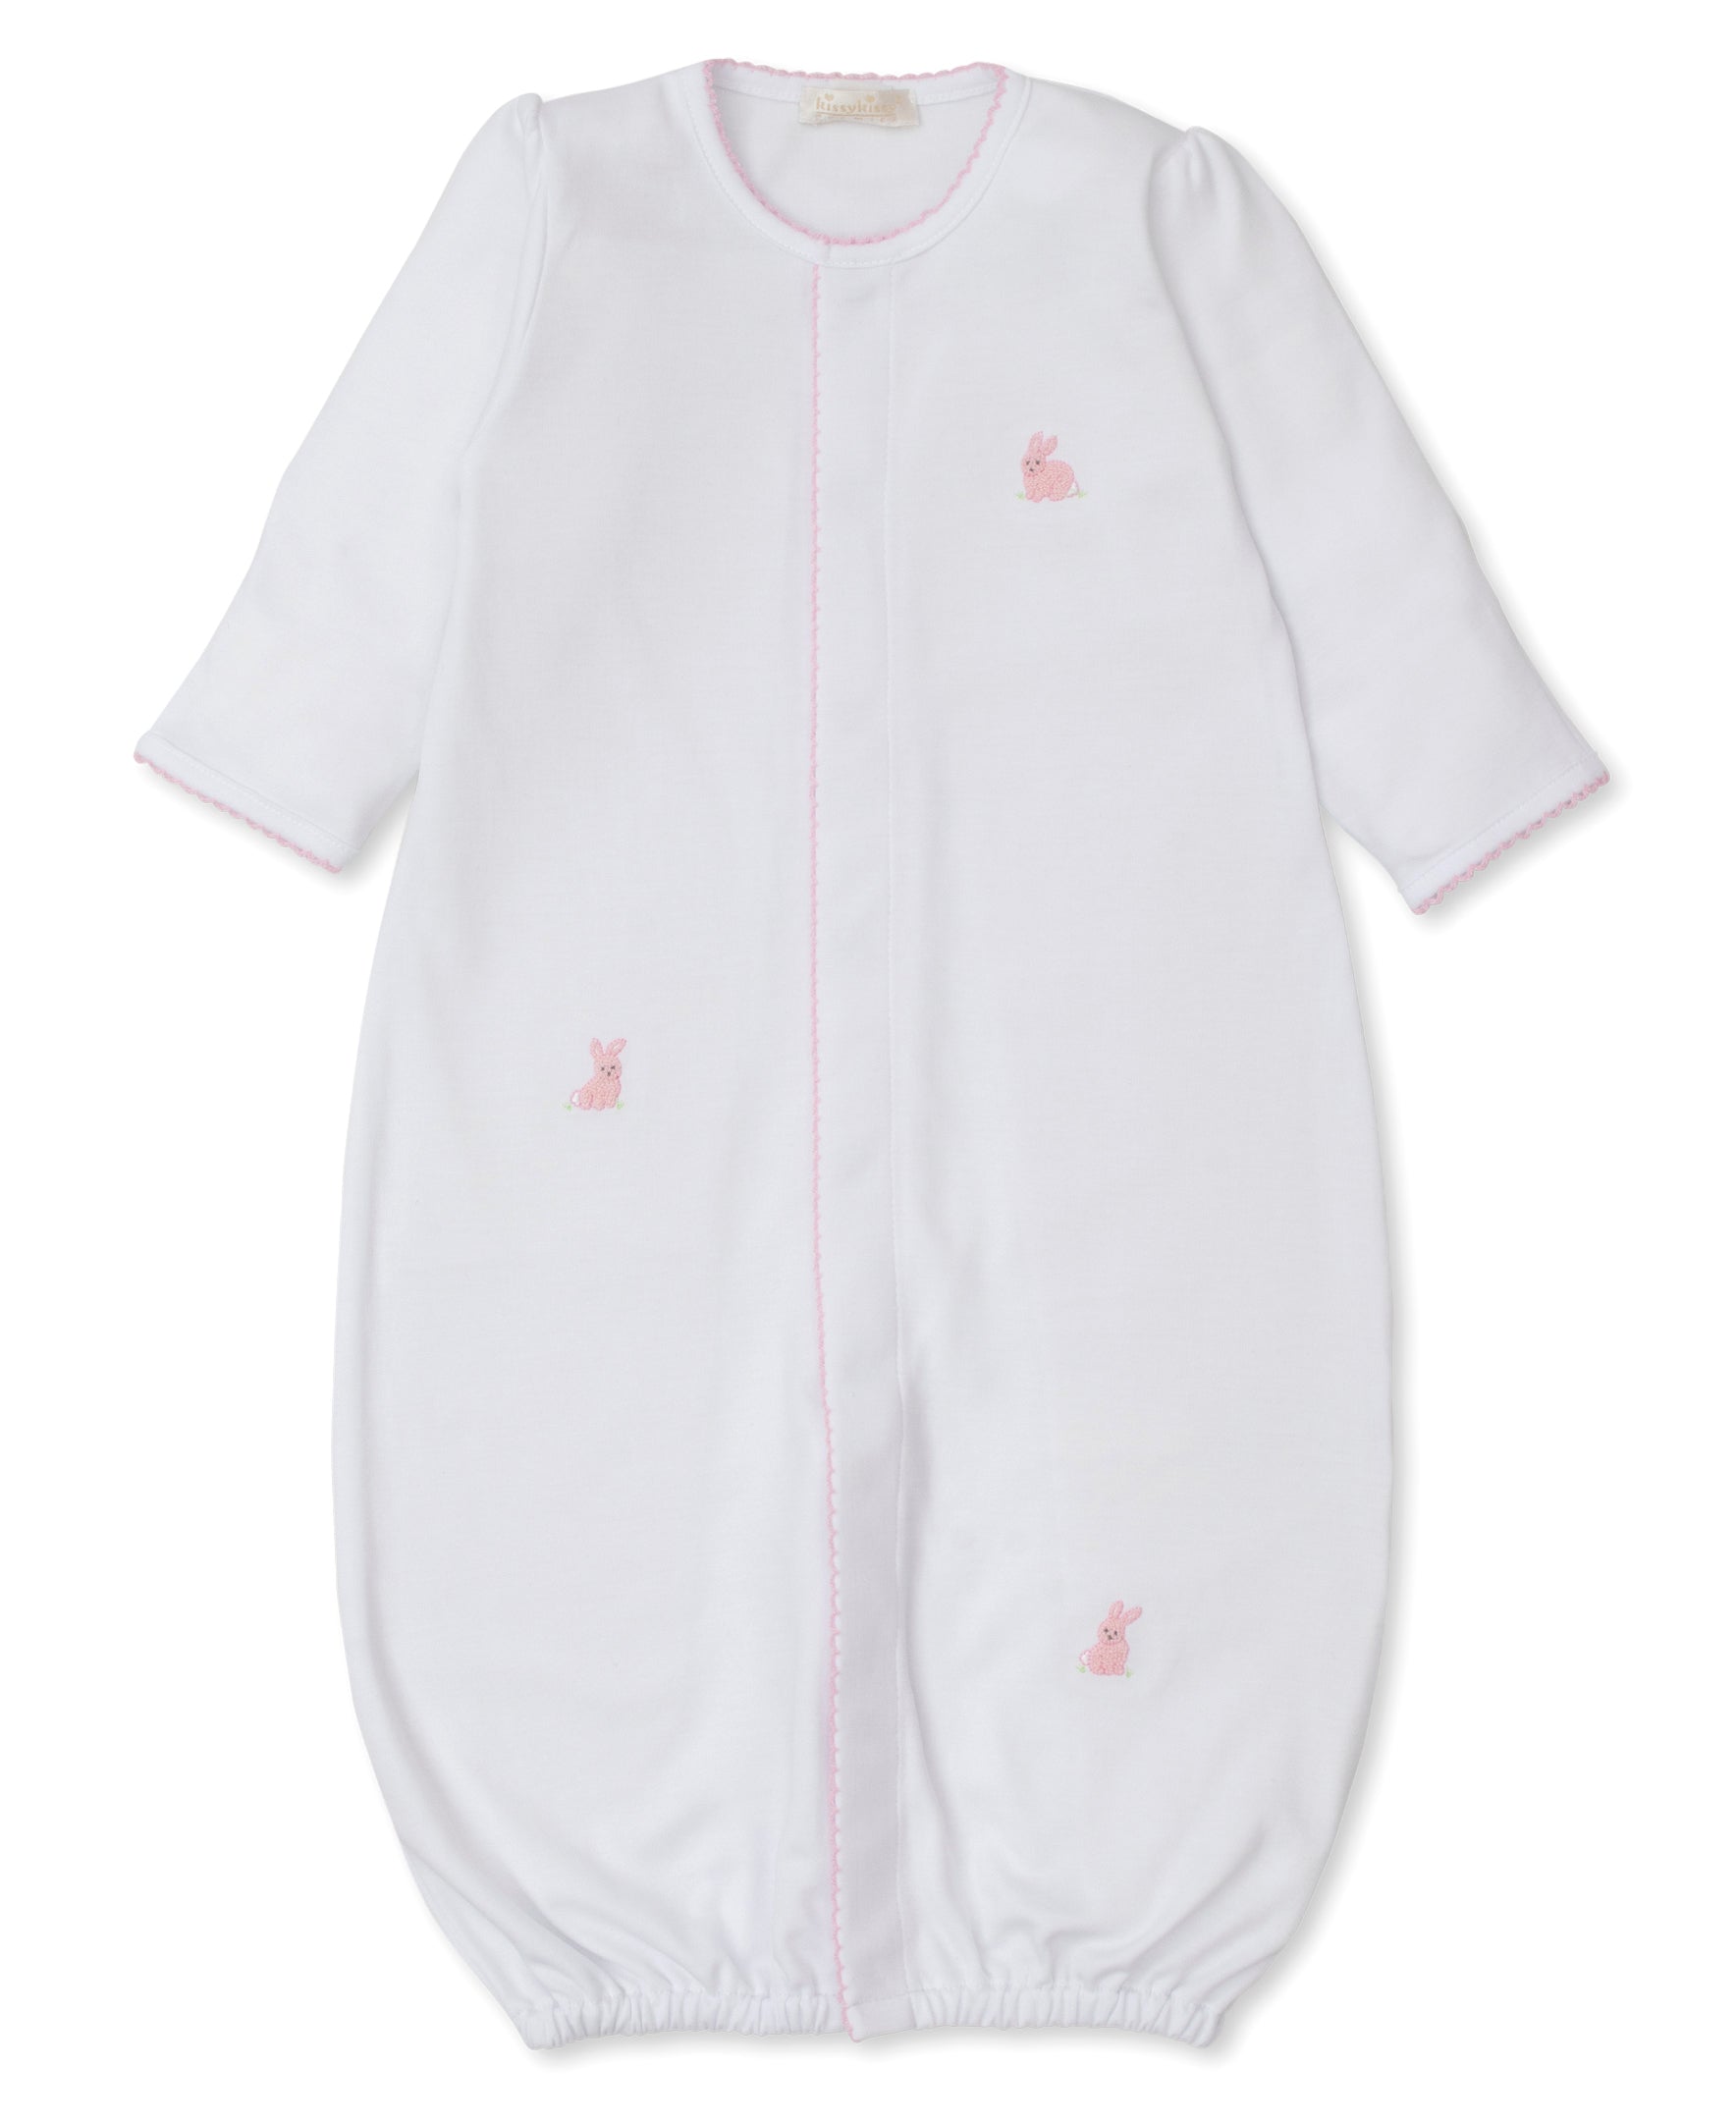 Premier Cottontail Hollows: Converter Gown w/ Hand Embroidered Bunnies